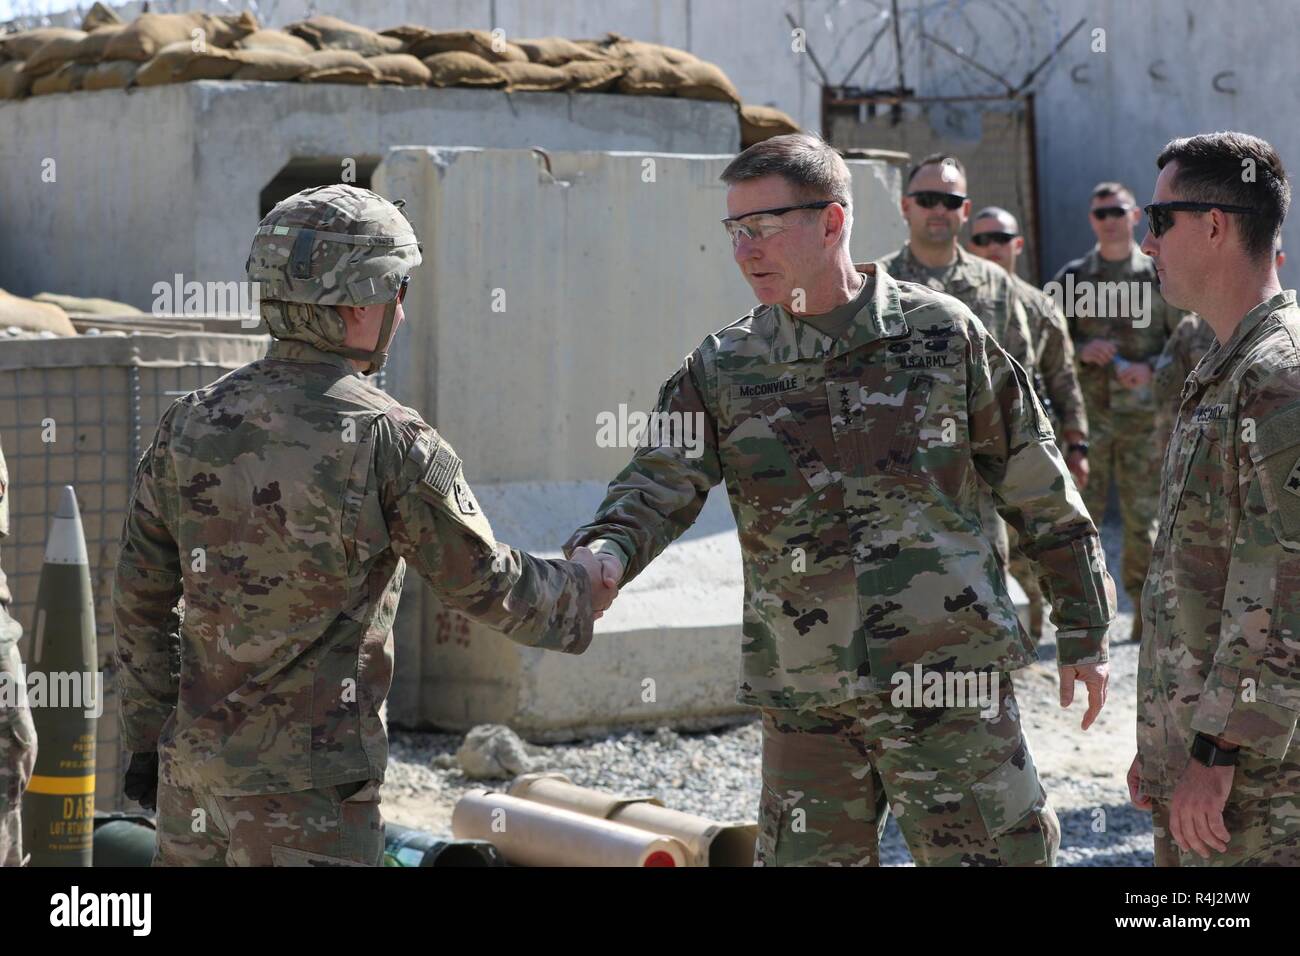 Laghman Province, Afghanistan (October 27, 2018) – Gen. James C. McConville, Vice Chief of Staff of the Army, greets Staff Sgt. Dylan Walsh, a cannon crewmember and Las Vegas, Nevada native from 2nd Battalion, 12th Field Artillery Regiment, 1st Stryker Brigade Combat Team, 4th Infantry Division during his visit to Train, Advise, assist, Command East headquarters. Stock Photo